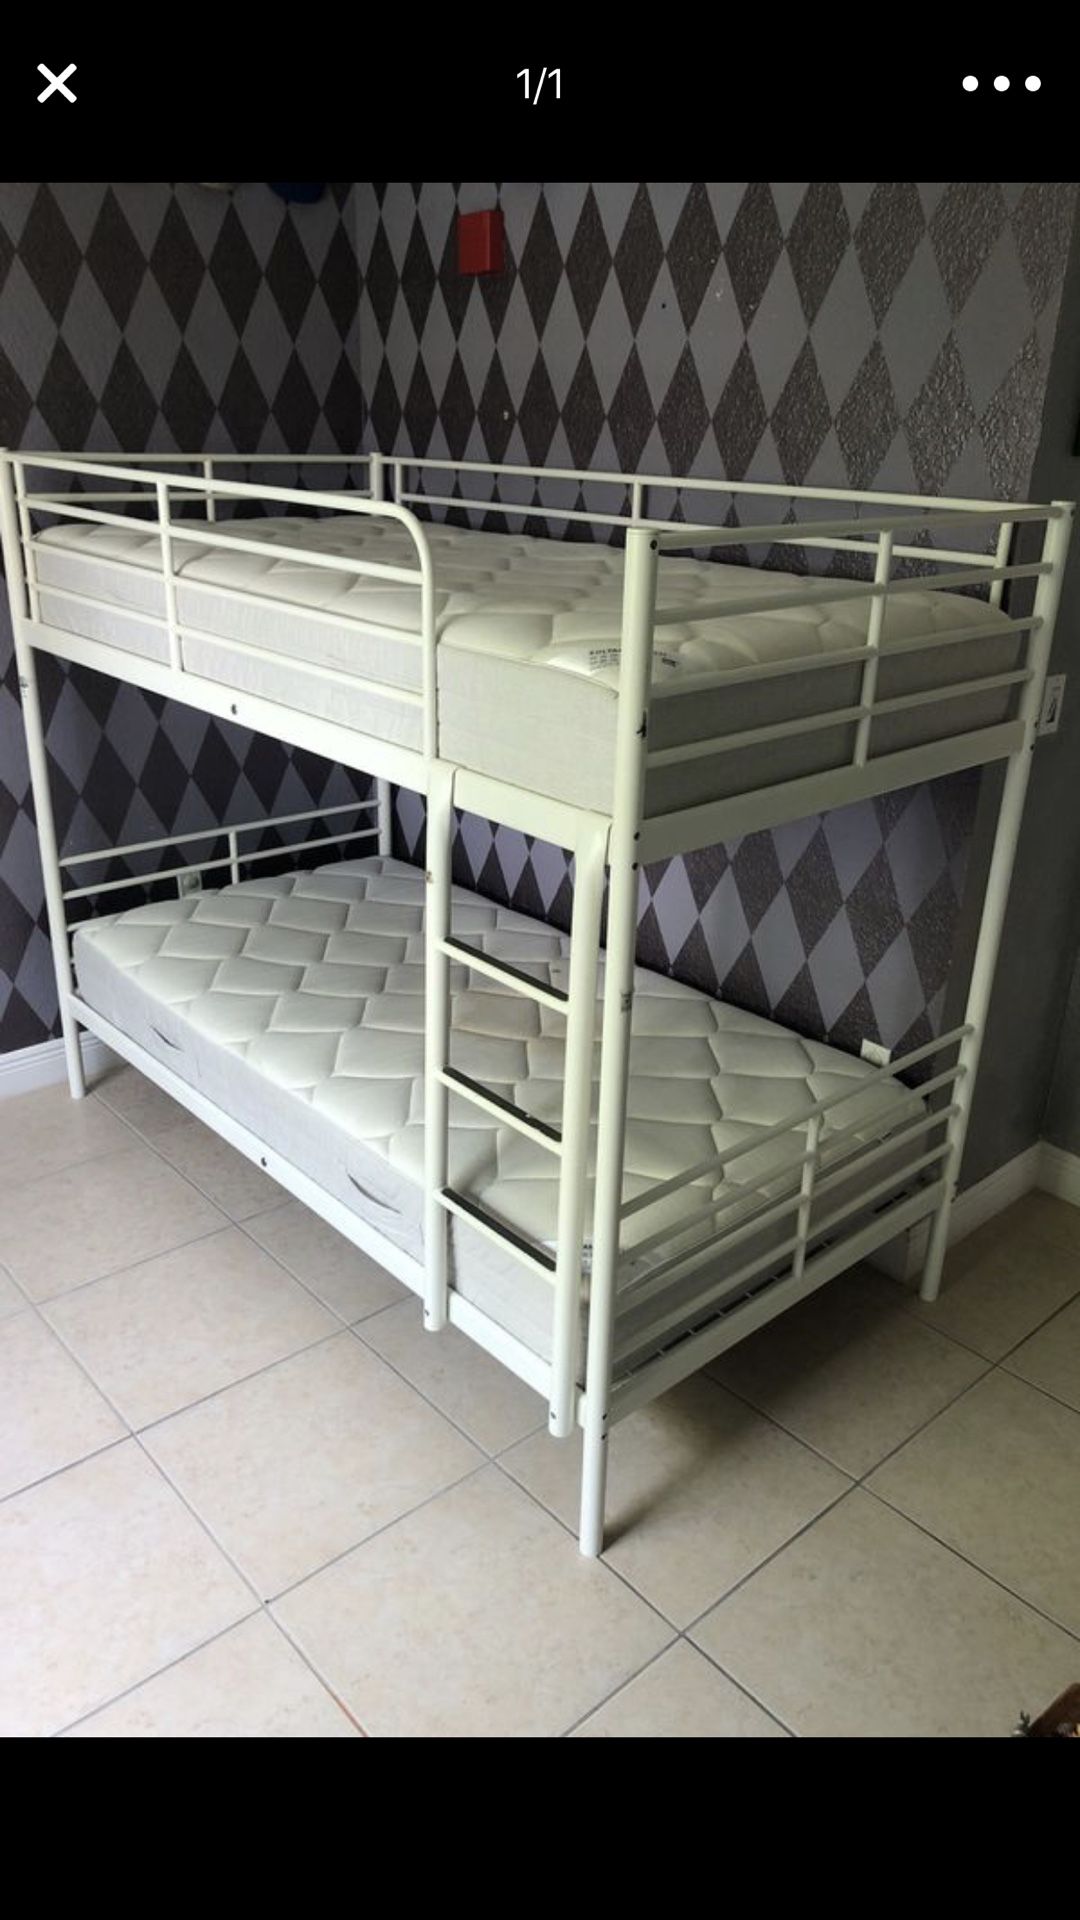 Bunk bed whit mattress and deliver